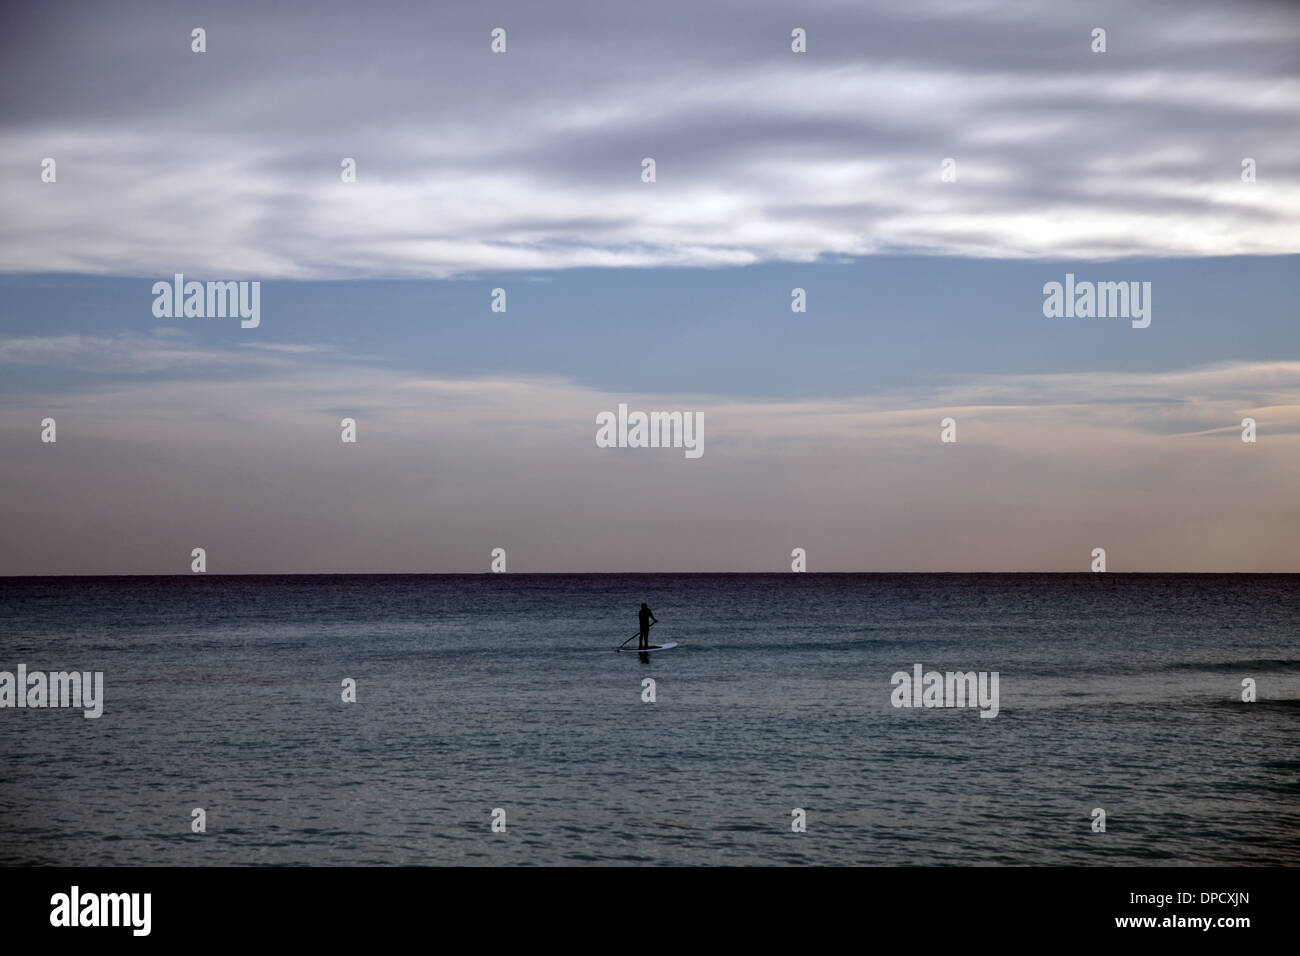 A surfer paddles in Nissi beach in Ayia Napa,Cyprus on January 9,2014 Stock Photo